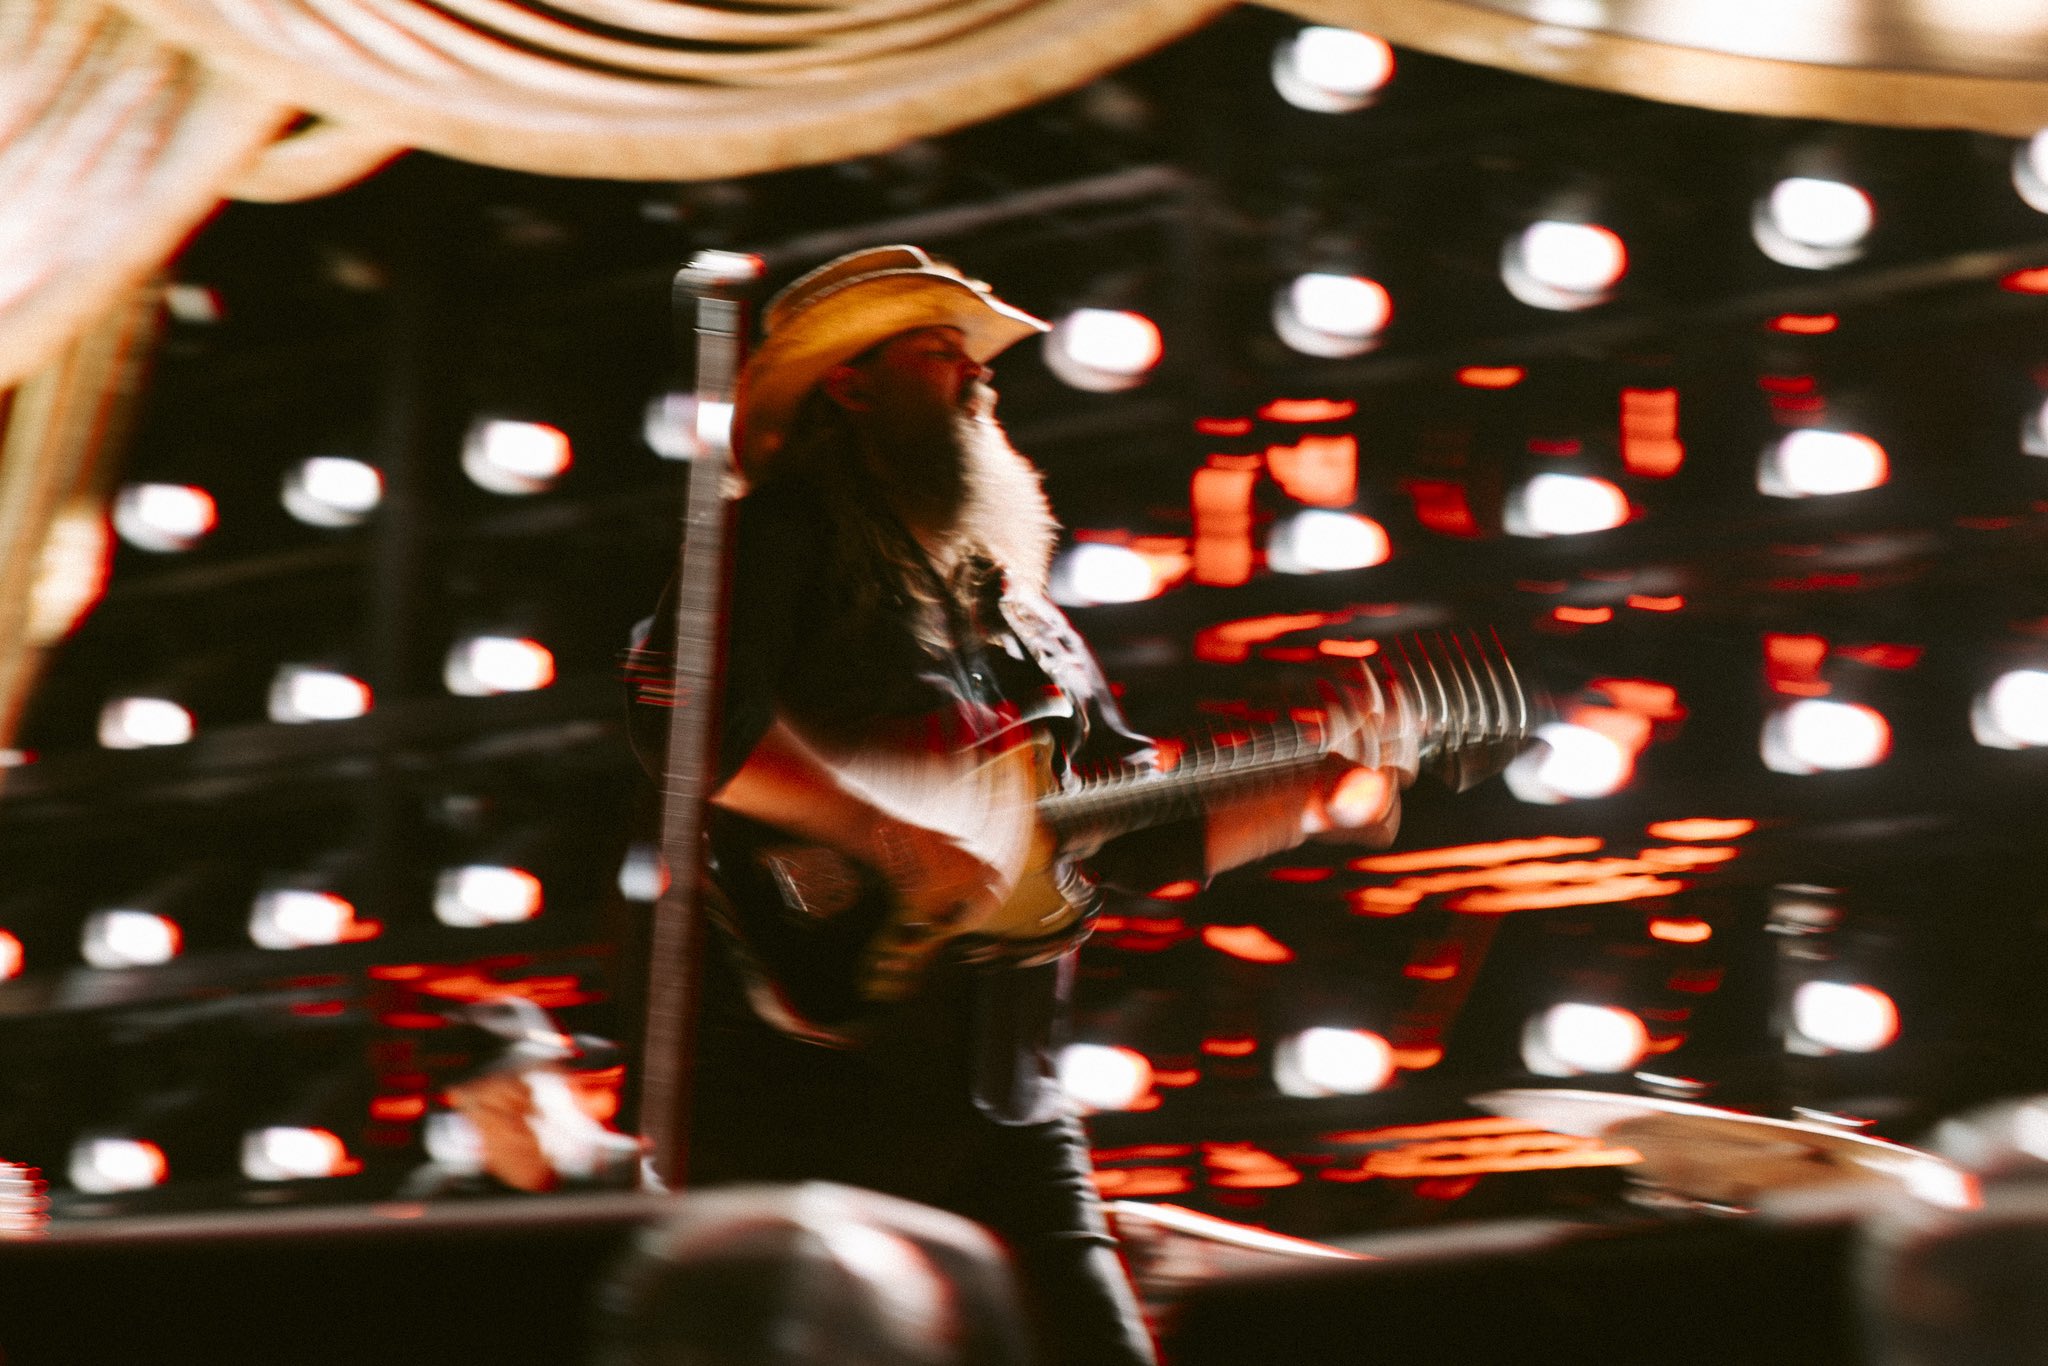 New Music Friday: Chris Stapleton Releases “White Horse,” Gearing Up for the Release of His Highly-Anticipated Fifth Studio Album